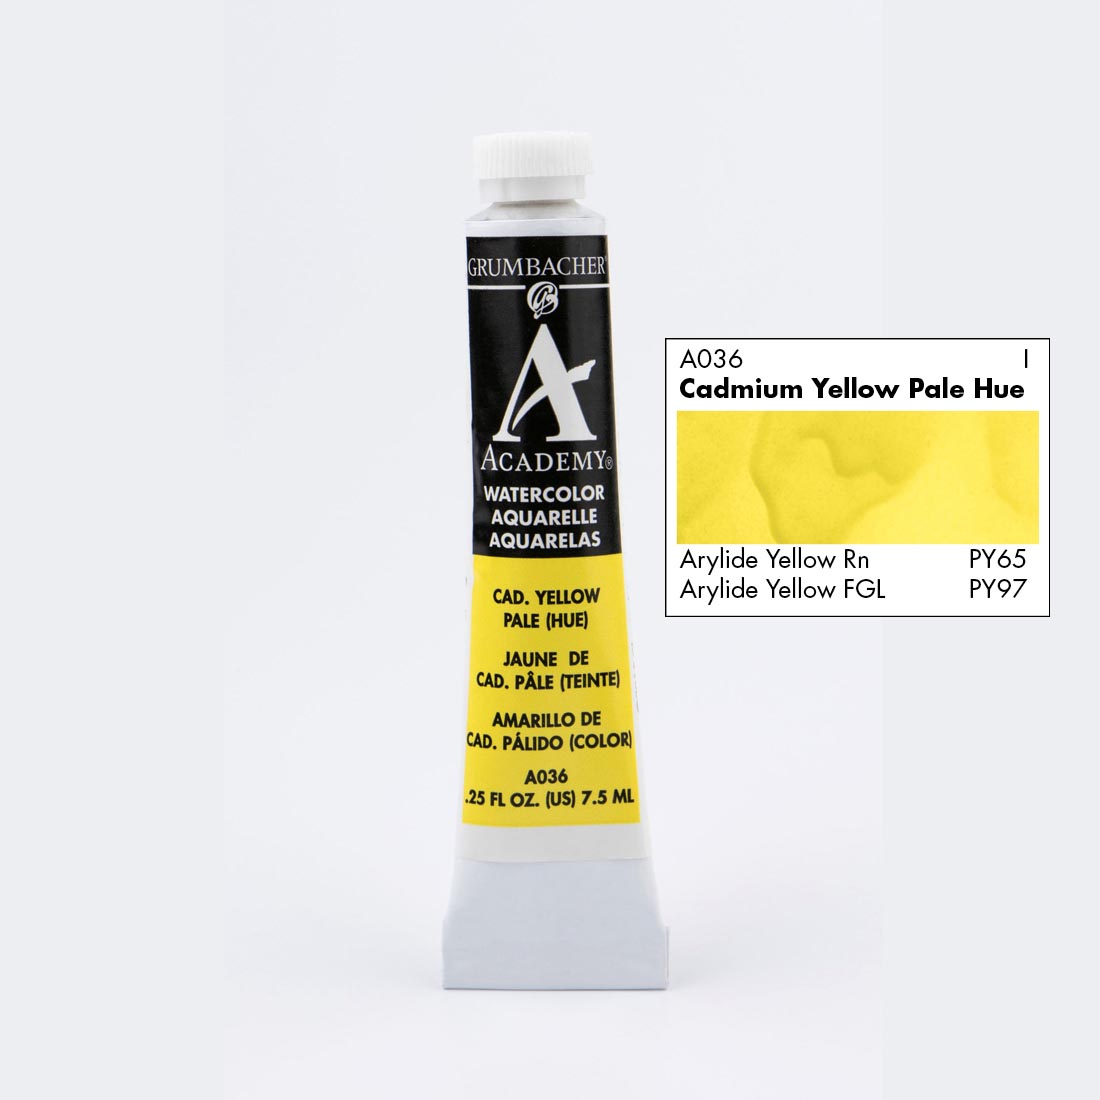 Tube of Grumbacher Academy Watercolor beside Cadmium Yellow Pale Hue color swatch